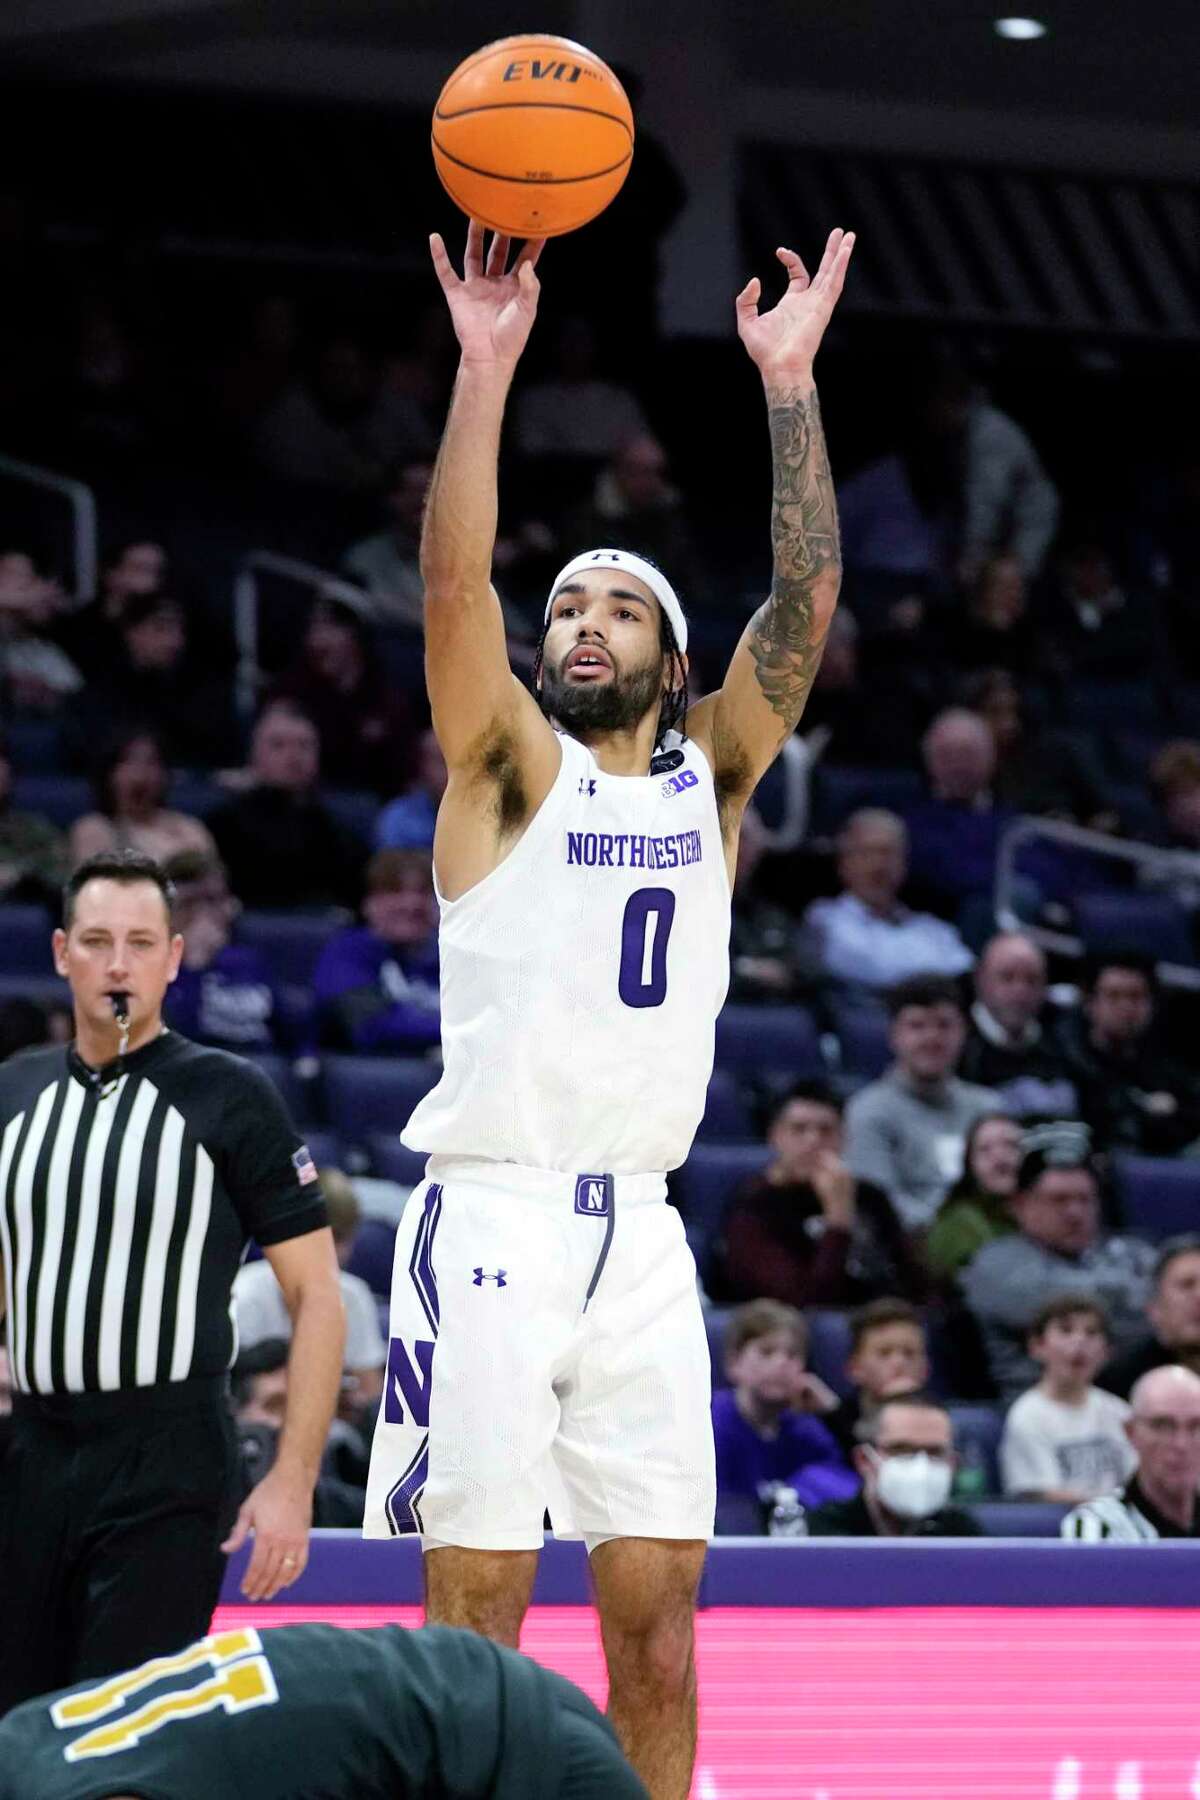 Northwestern guard Boo Buie (0) shoots against Purdue Fort Wayne during the second half of an NCAA college basketball game in Evanston, Ill., Friday, Nov. 18, 2022. (AP Photo/Nam Y. Huh)